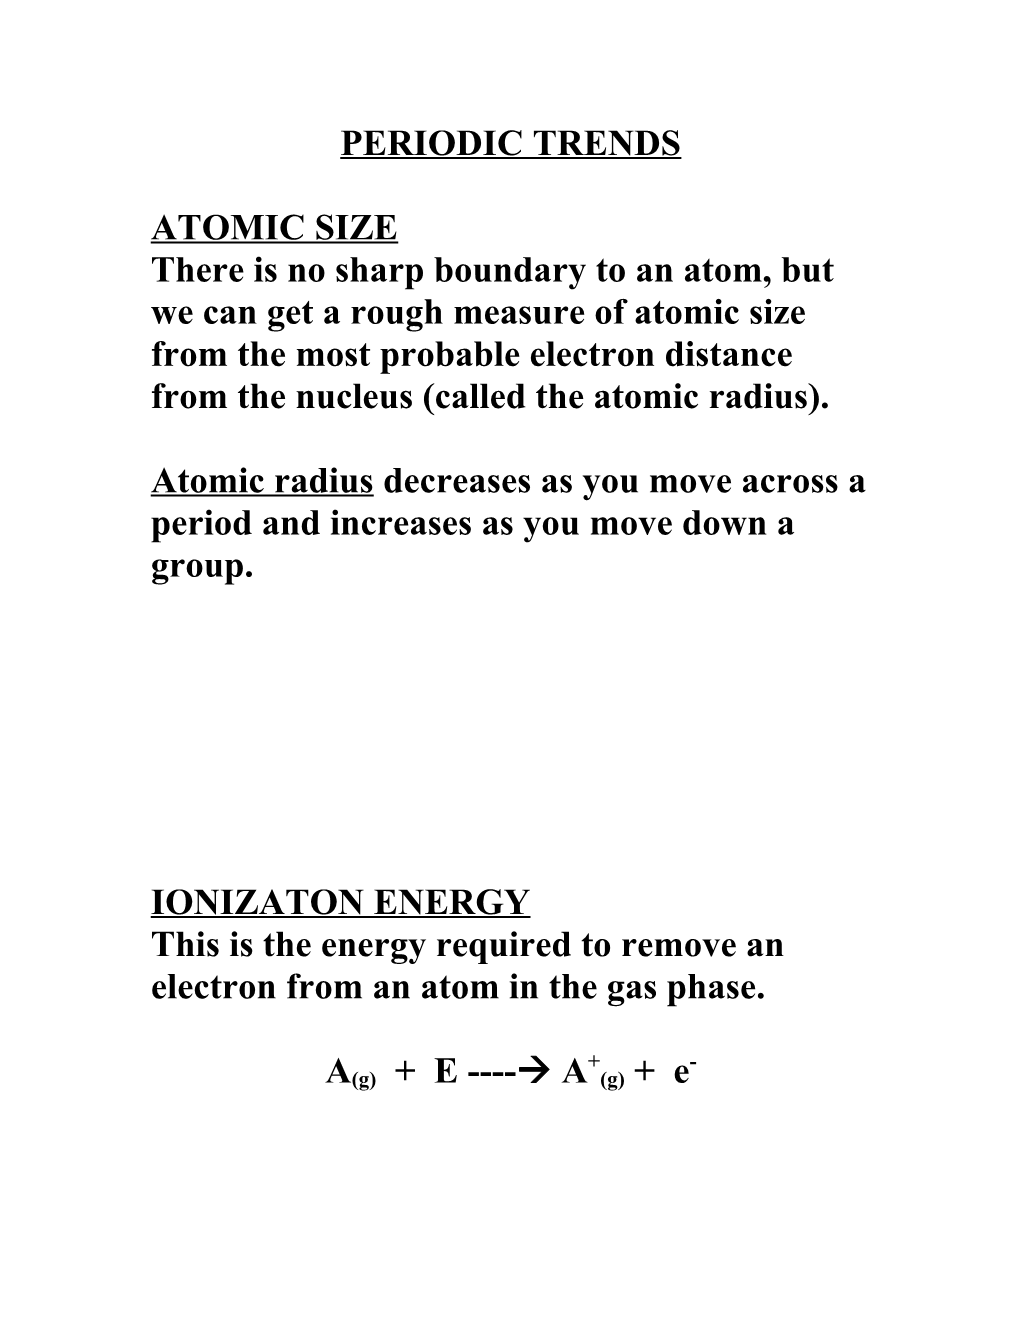 This Is the Energy Required to Remove an Electron from an Atom in the Gas Phase